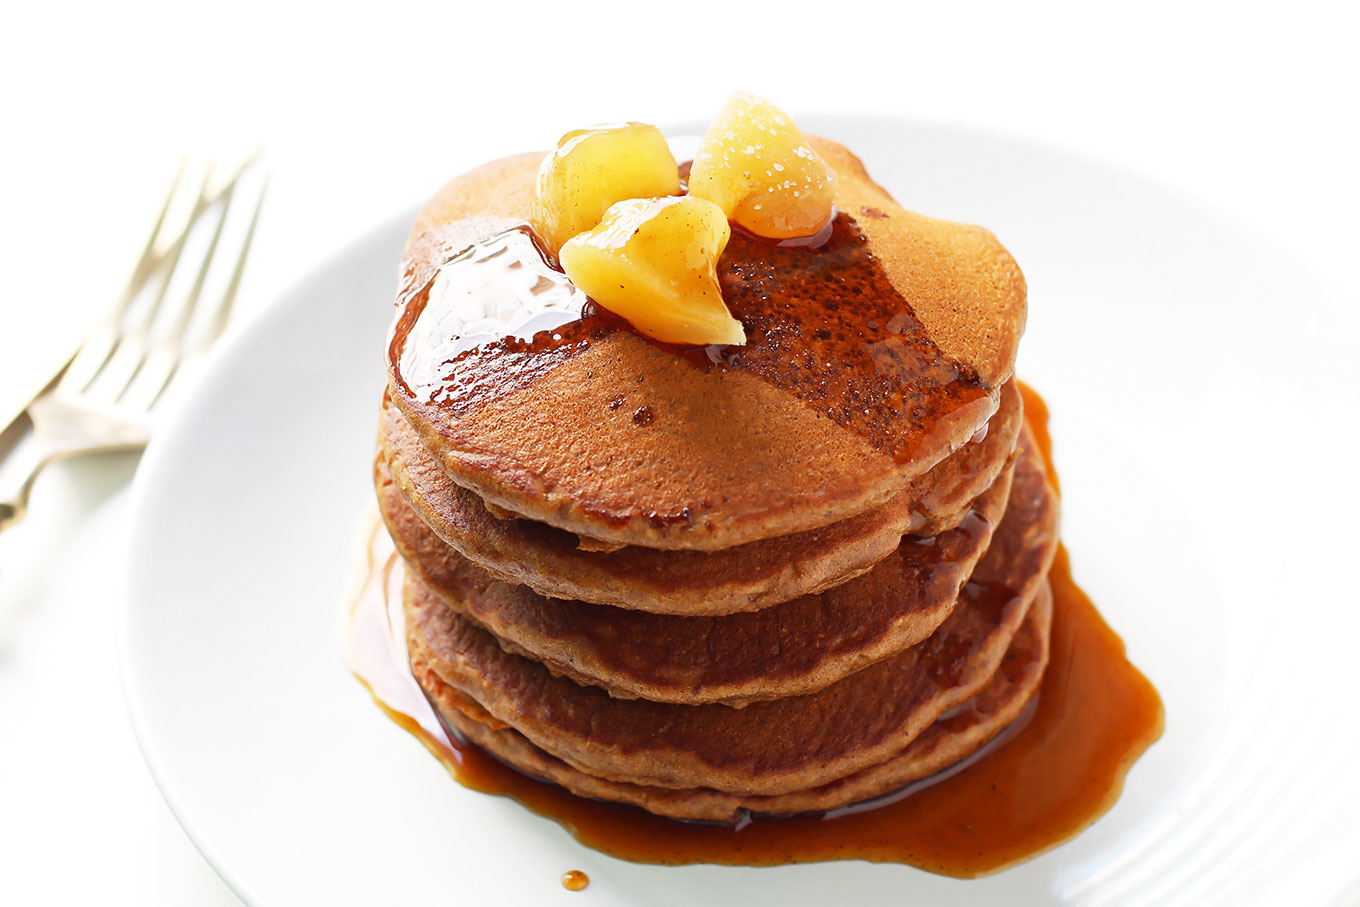 Whole Wheat Gingerbread Pancakes